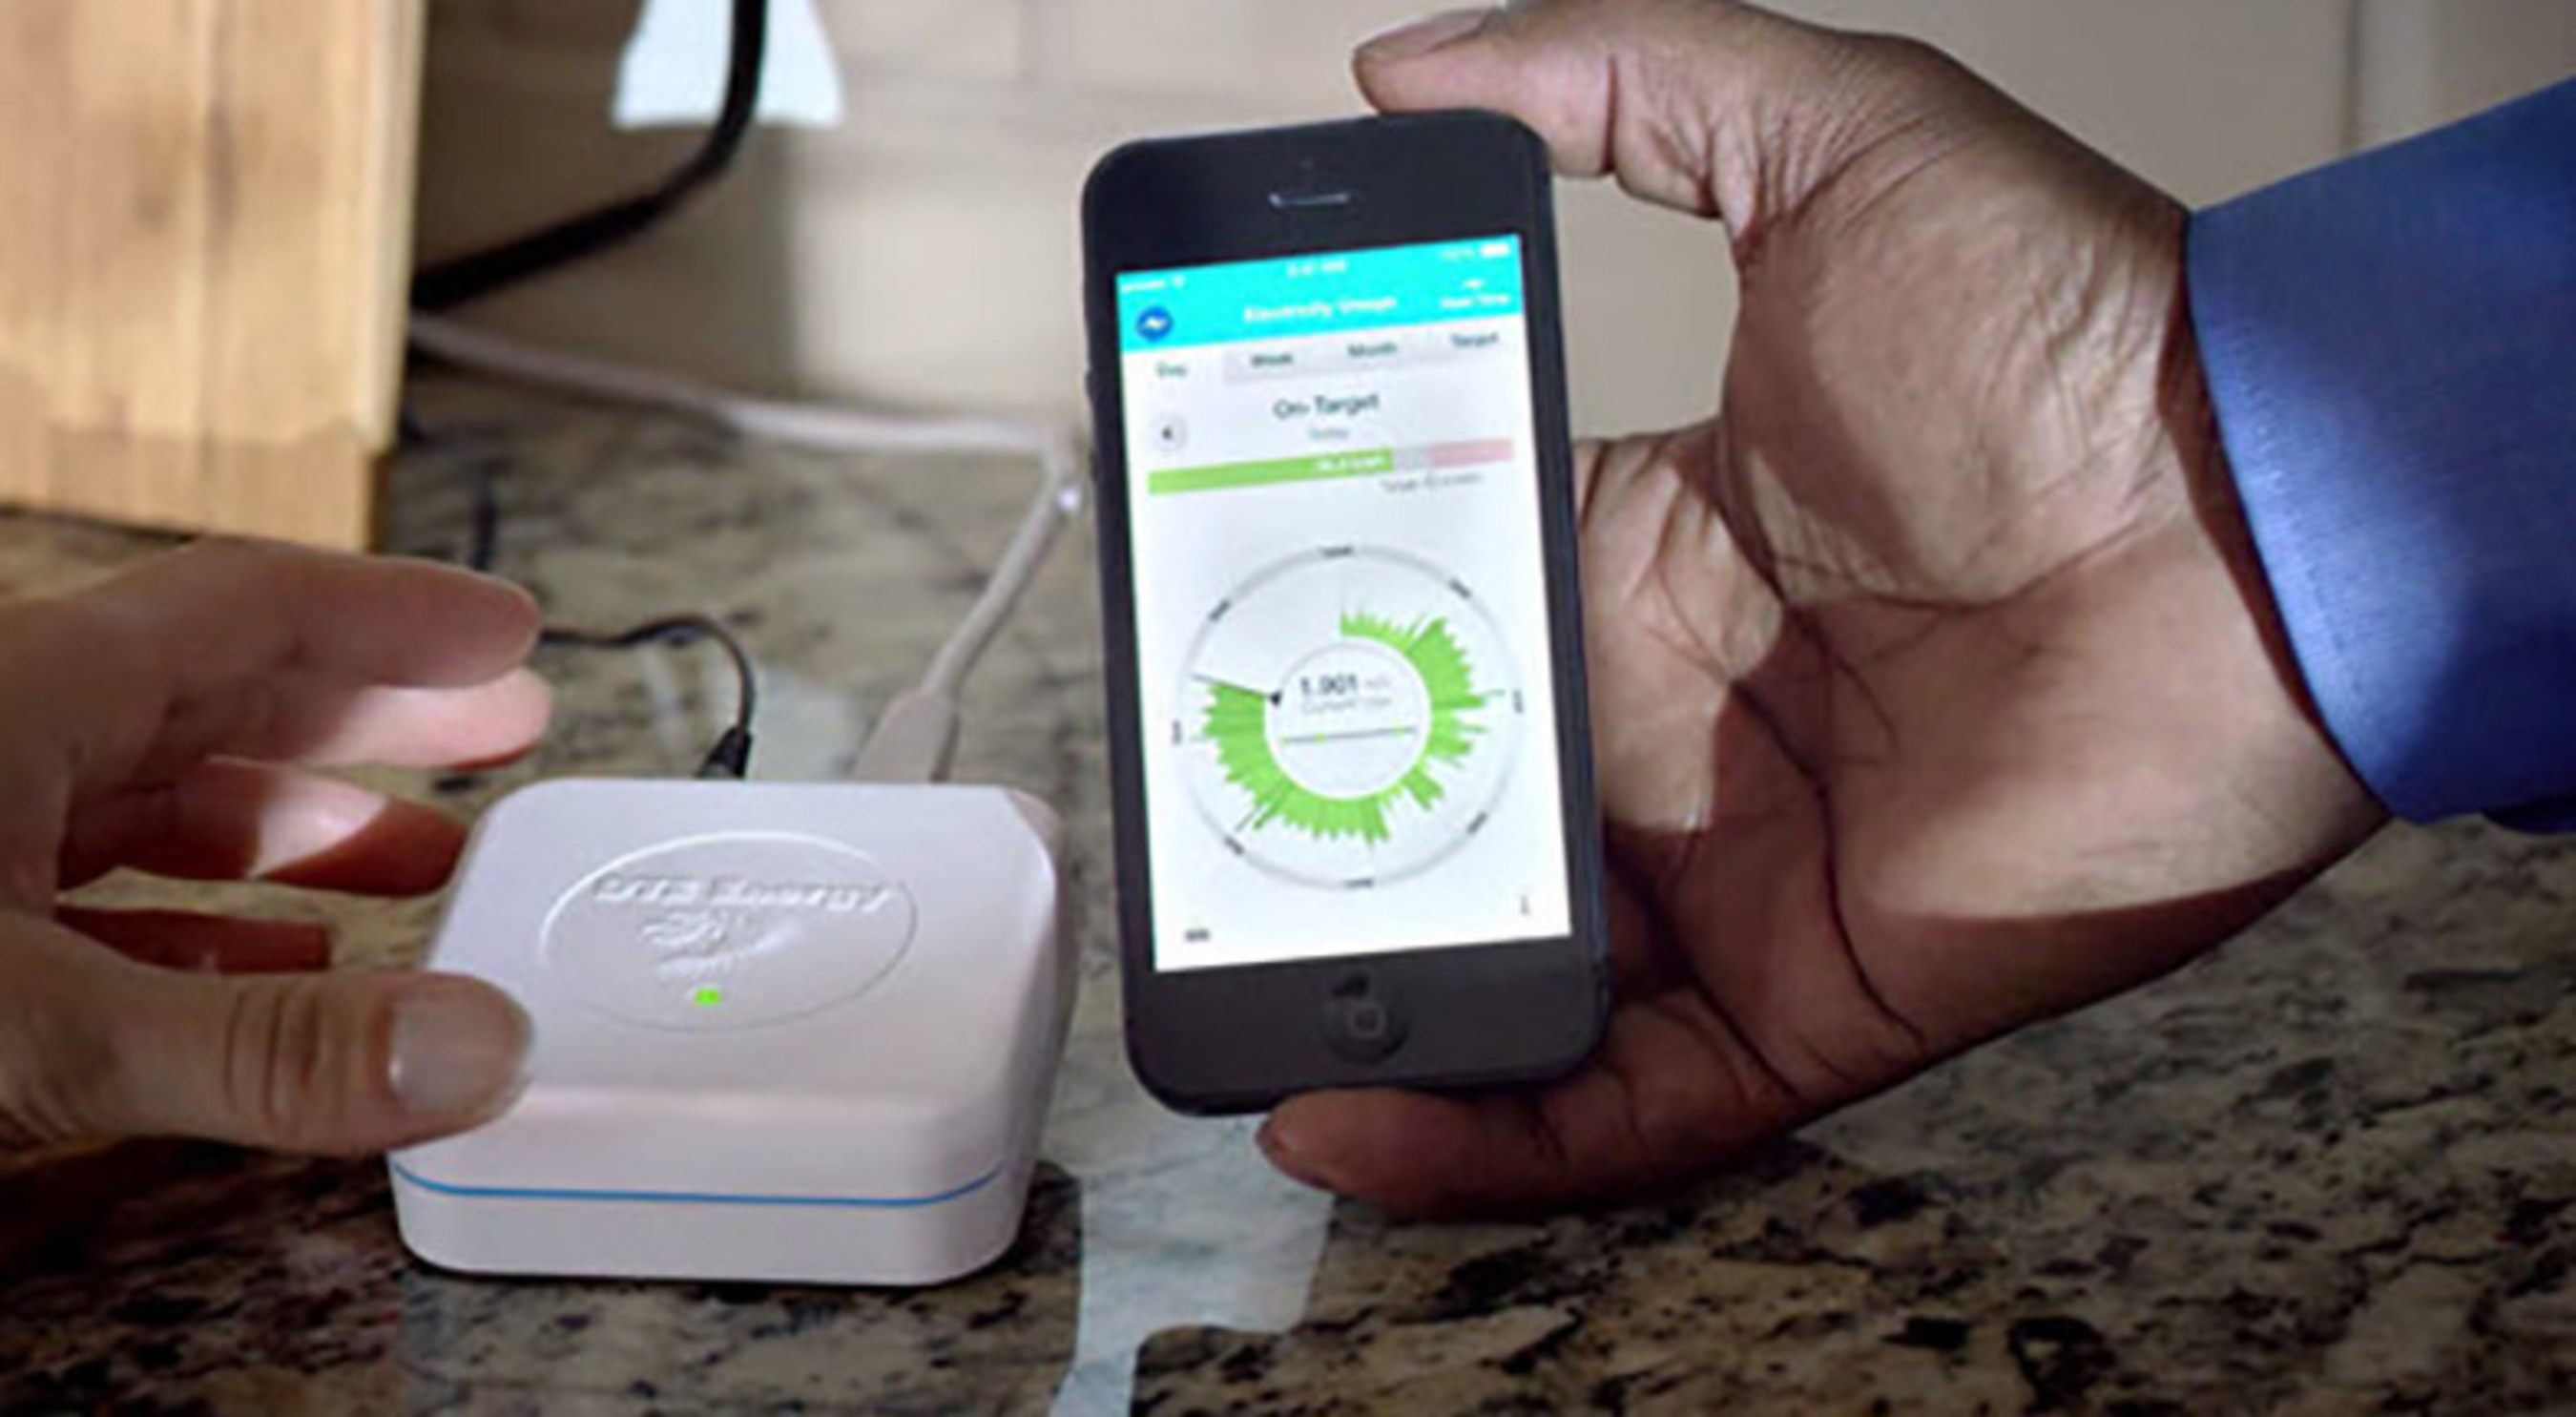 dte-insight-app-offers-customers-new-ways-to-save-on-monthly-energy-bills